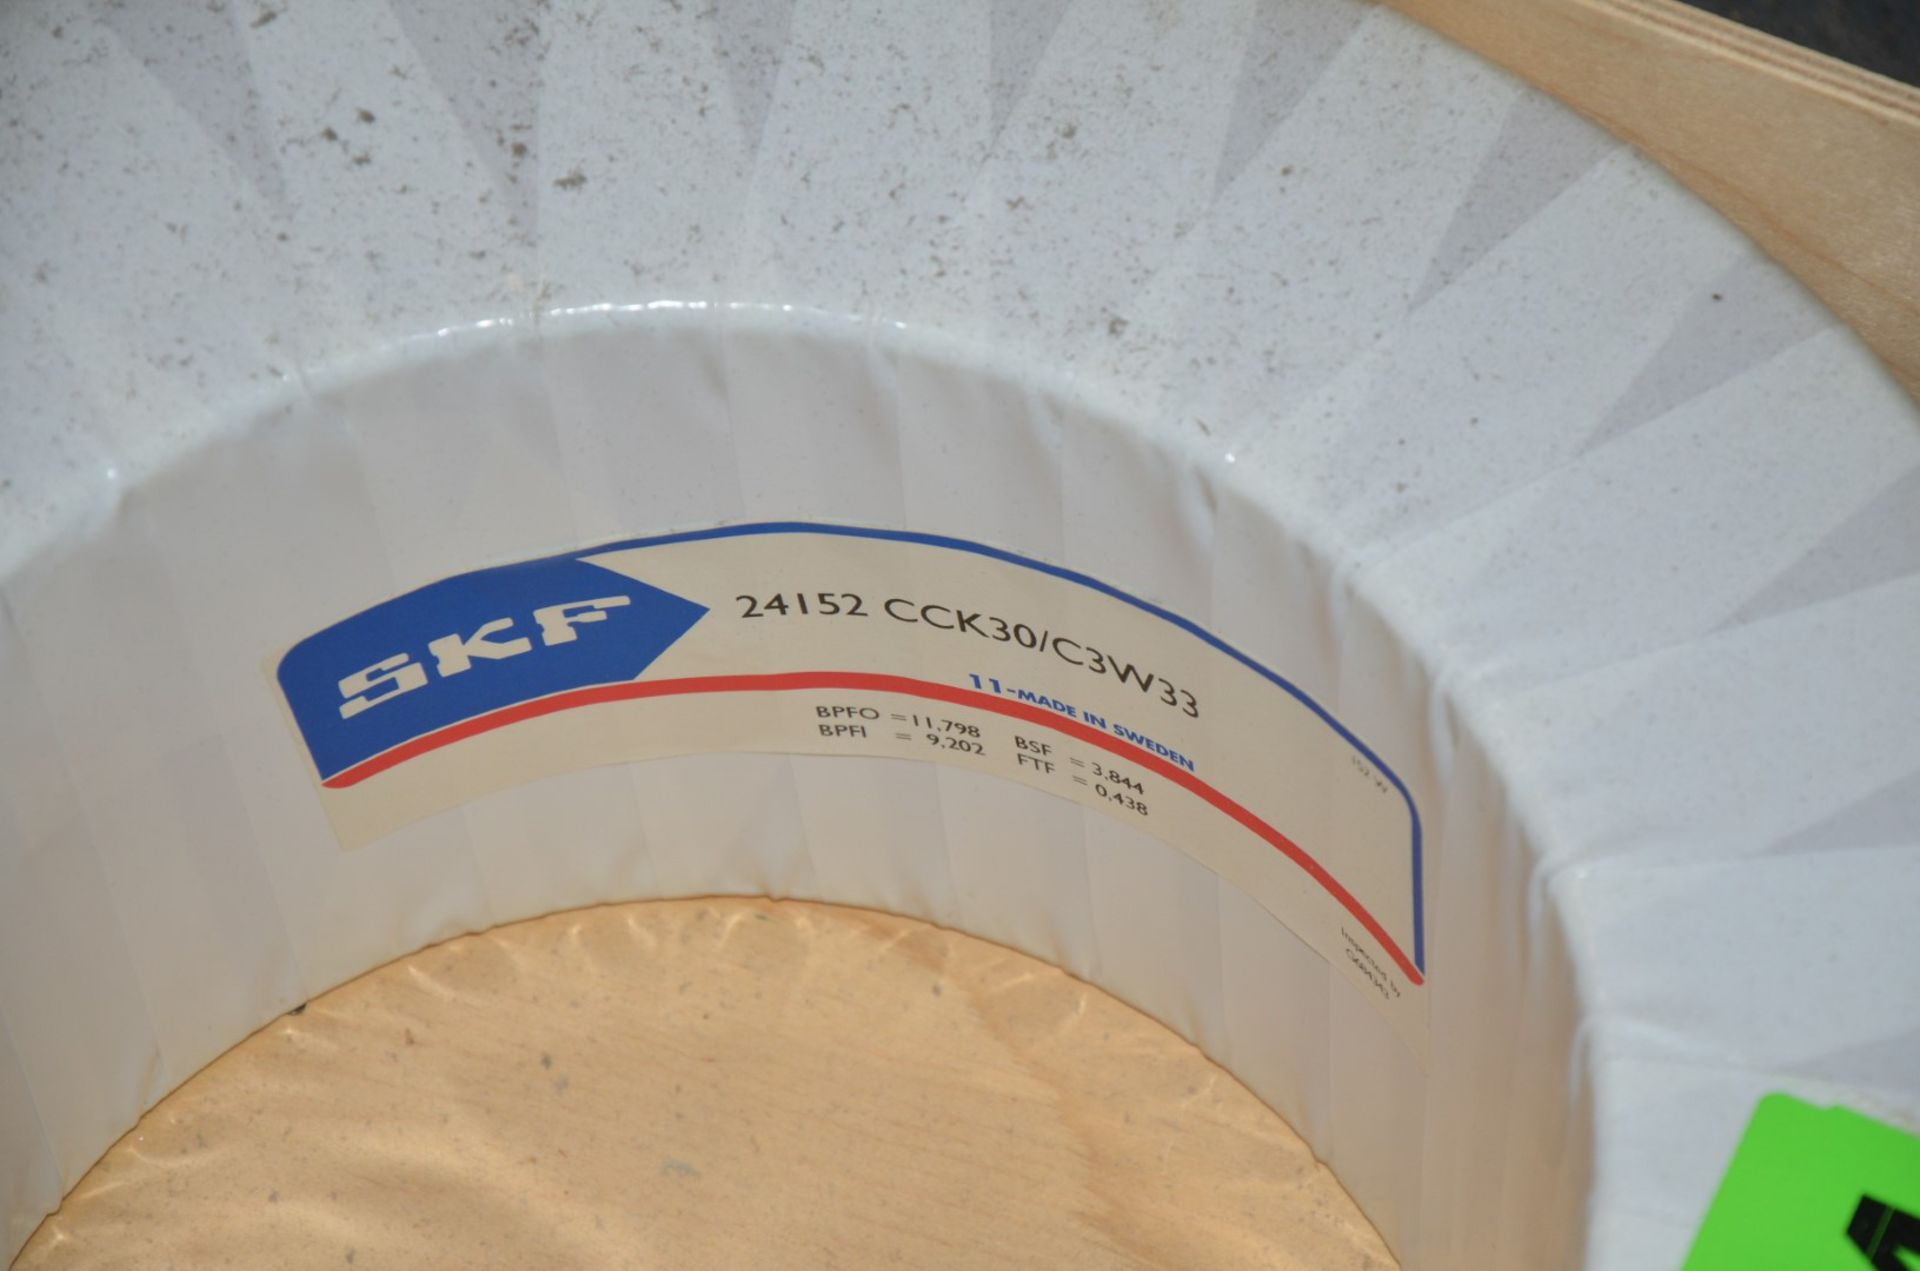 SKF 24152CCK30/C3W33 BEARING [RIGGING FEE FOR LOT #1614 - $25 USD PLUS APPLICABLE TAXES] - Image 2 of 2